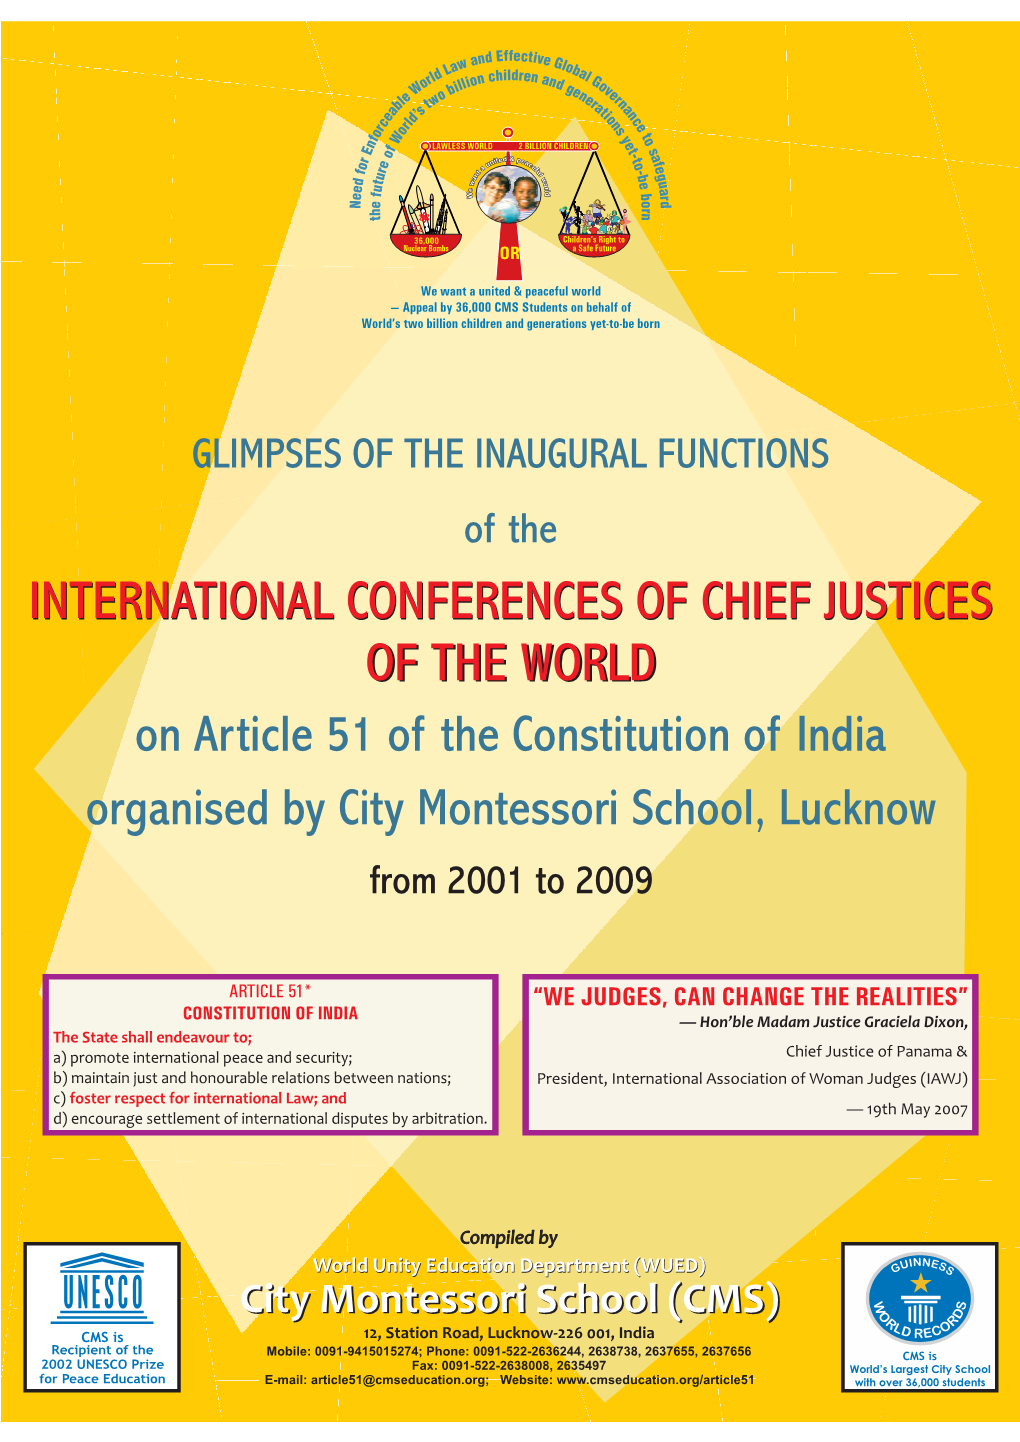 International Conferences of Chief Justices of the World?